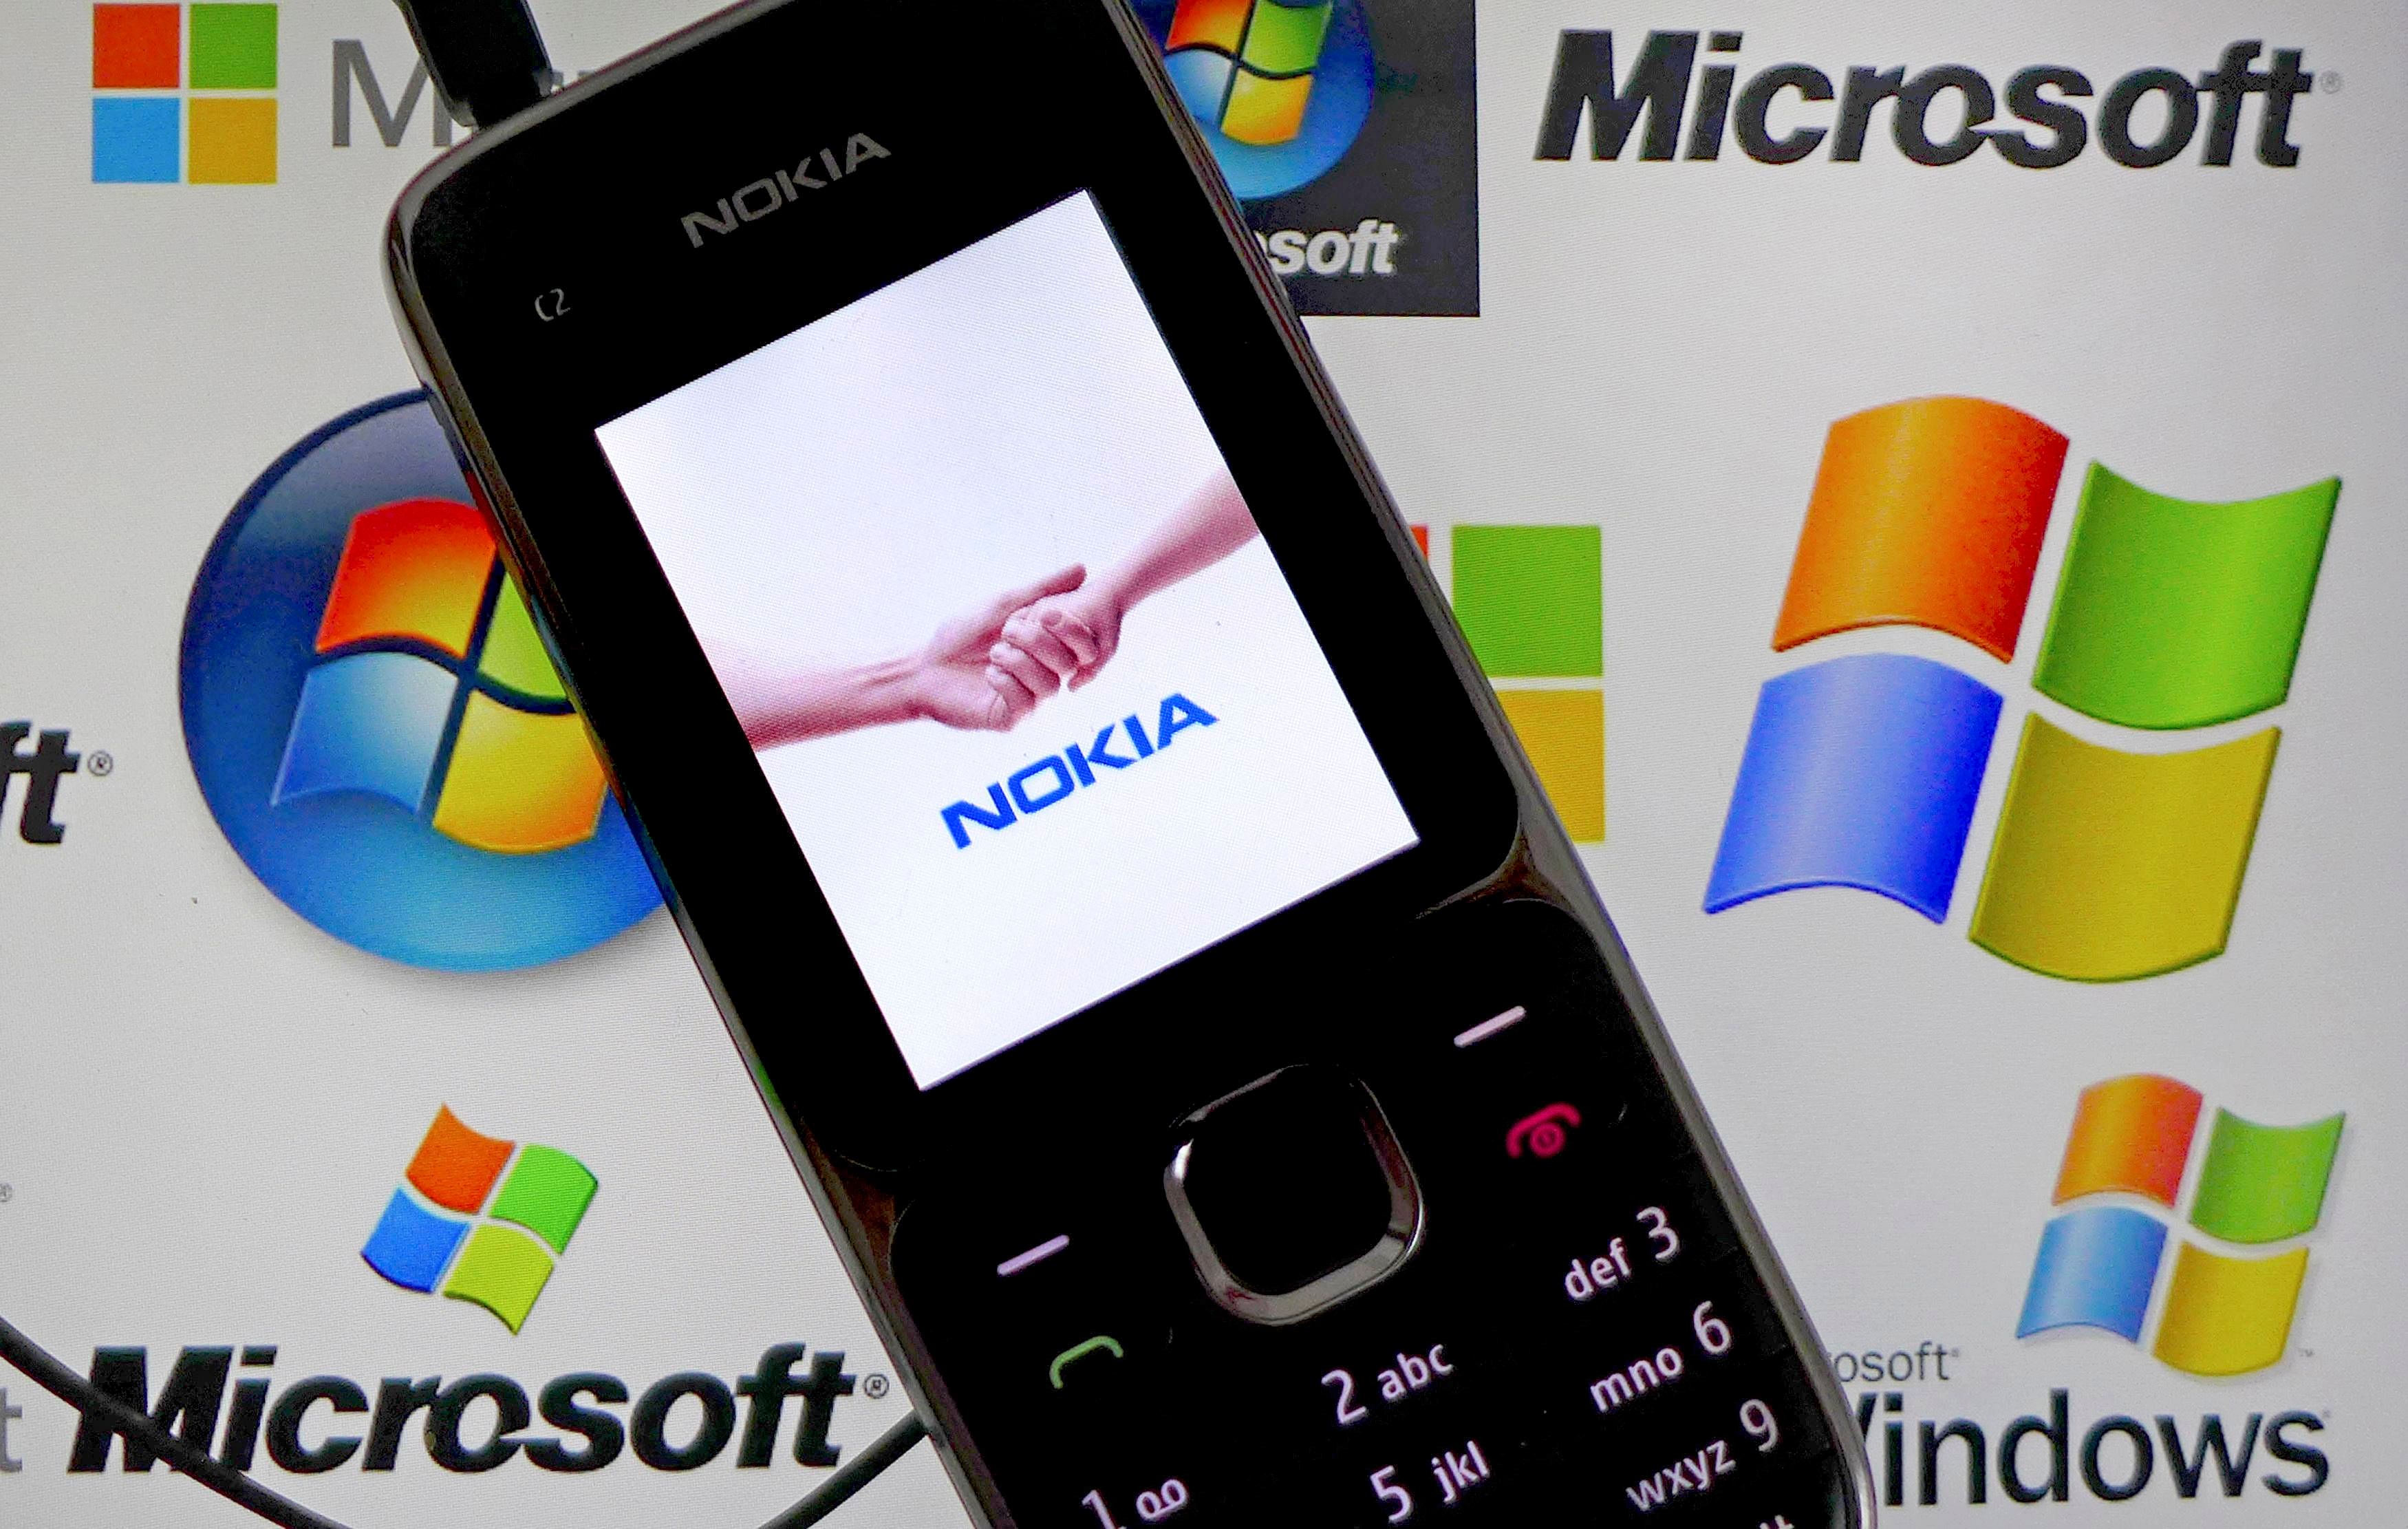 Microsoft's chief shop steward in Finland, Kalle Kiili, told AFP the decision means Microsoft will no longer design or manufacture phones. reuters file photo